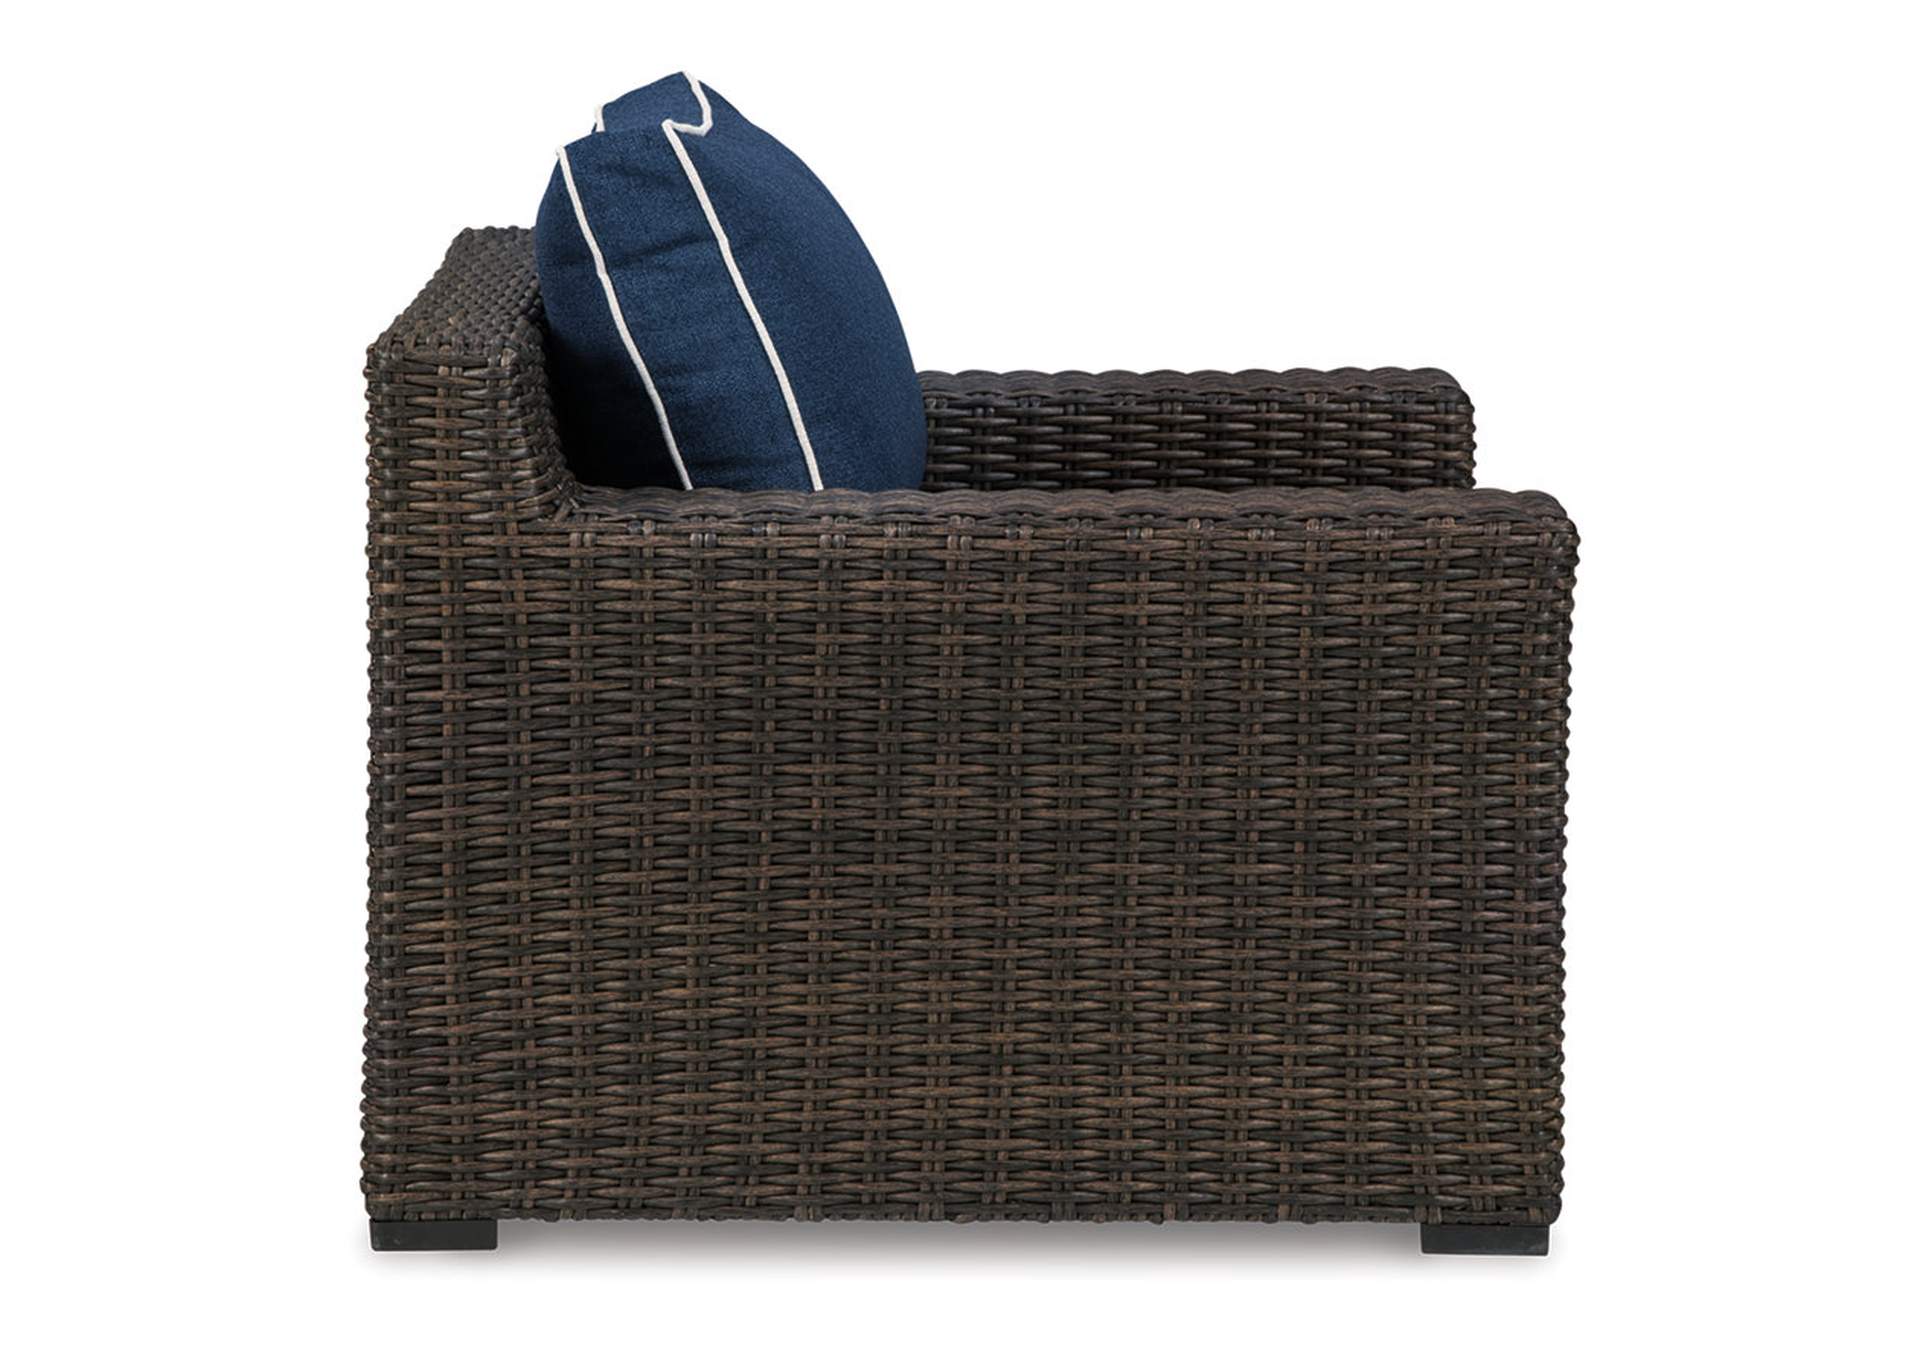 Grasson Lane Lounge Chair with Cushion,Outdoor By Ashley